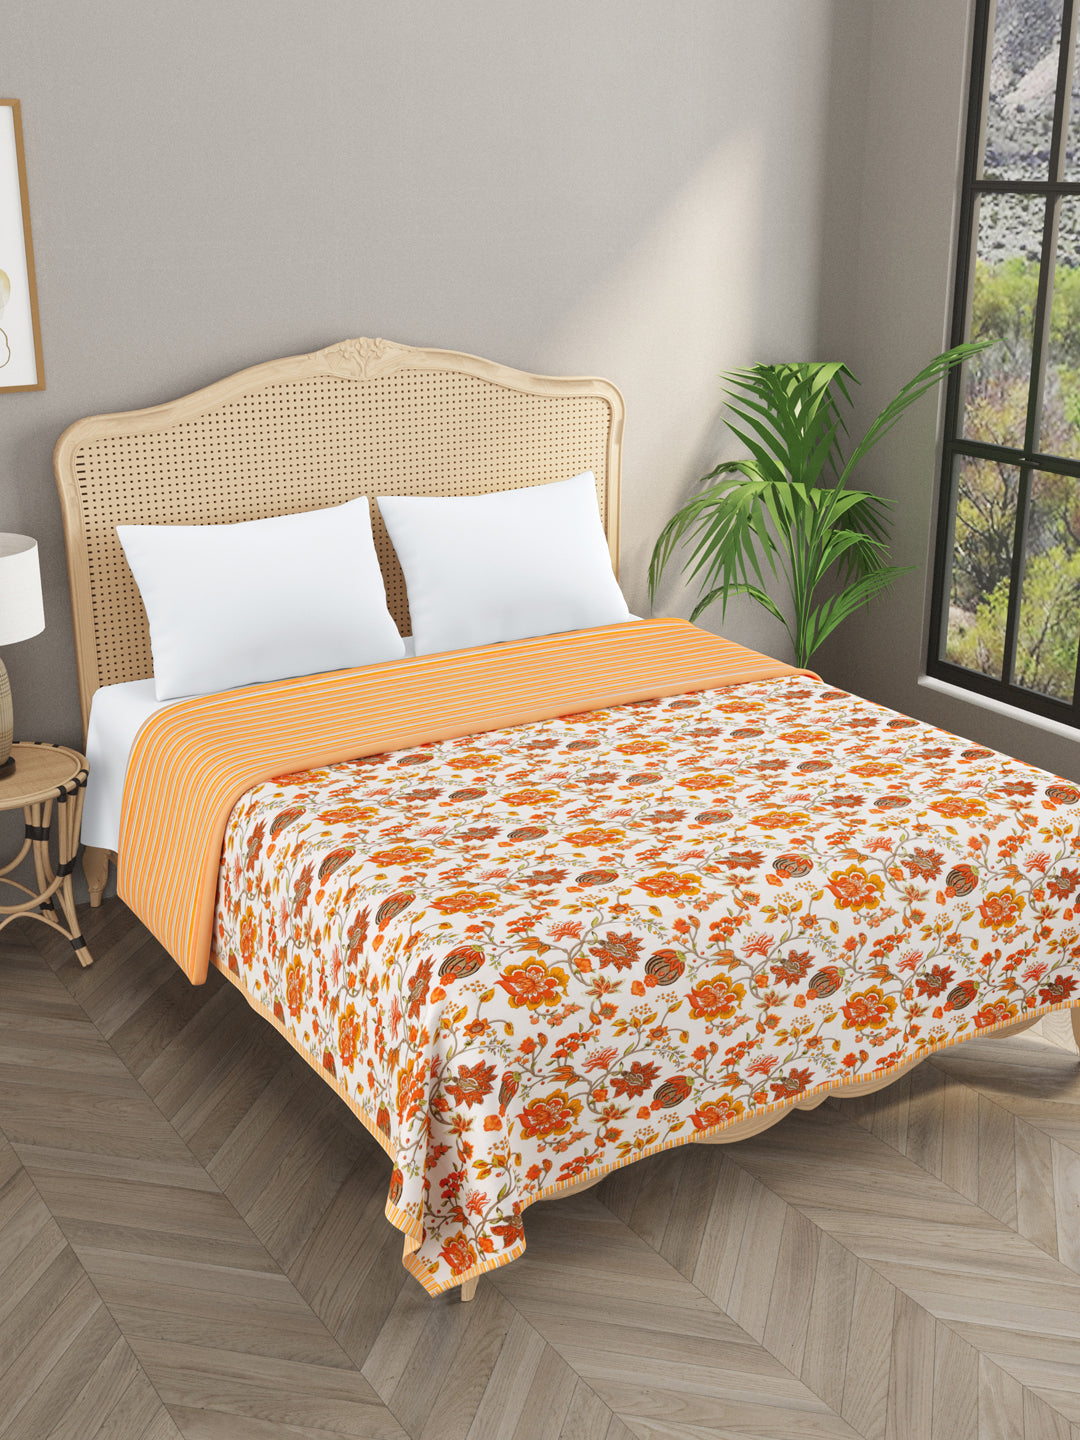 Double Bed Floral Print Reversible Dohar/AC Blanket in Thick Cotton